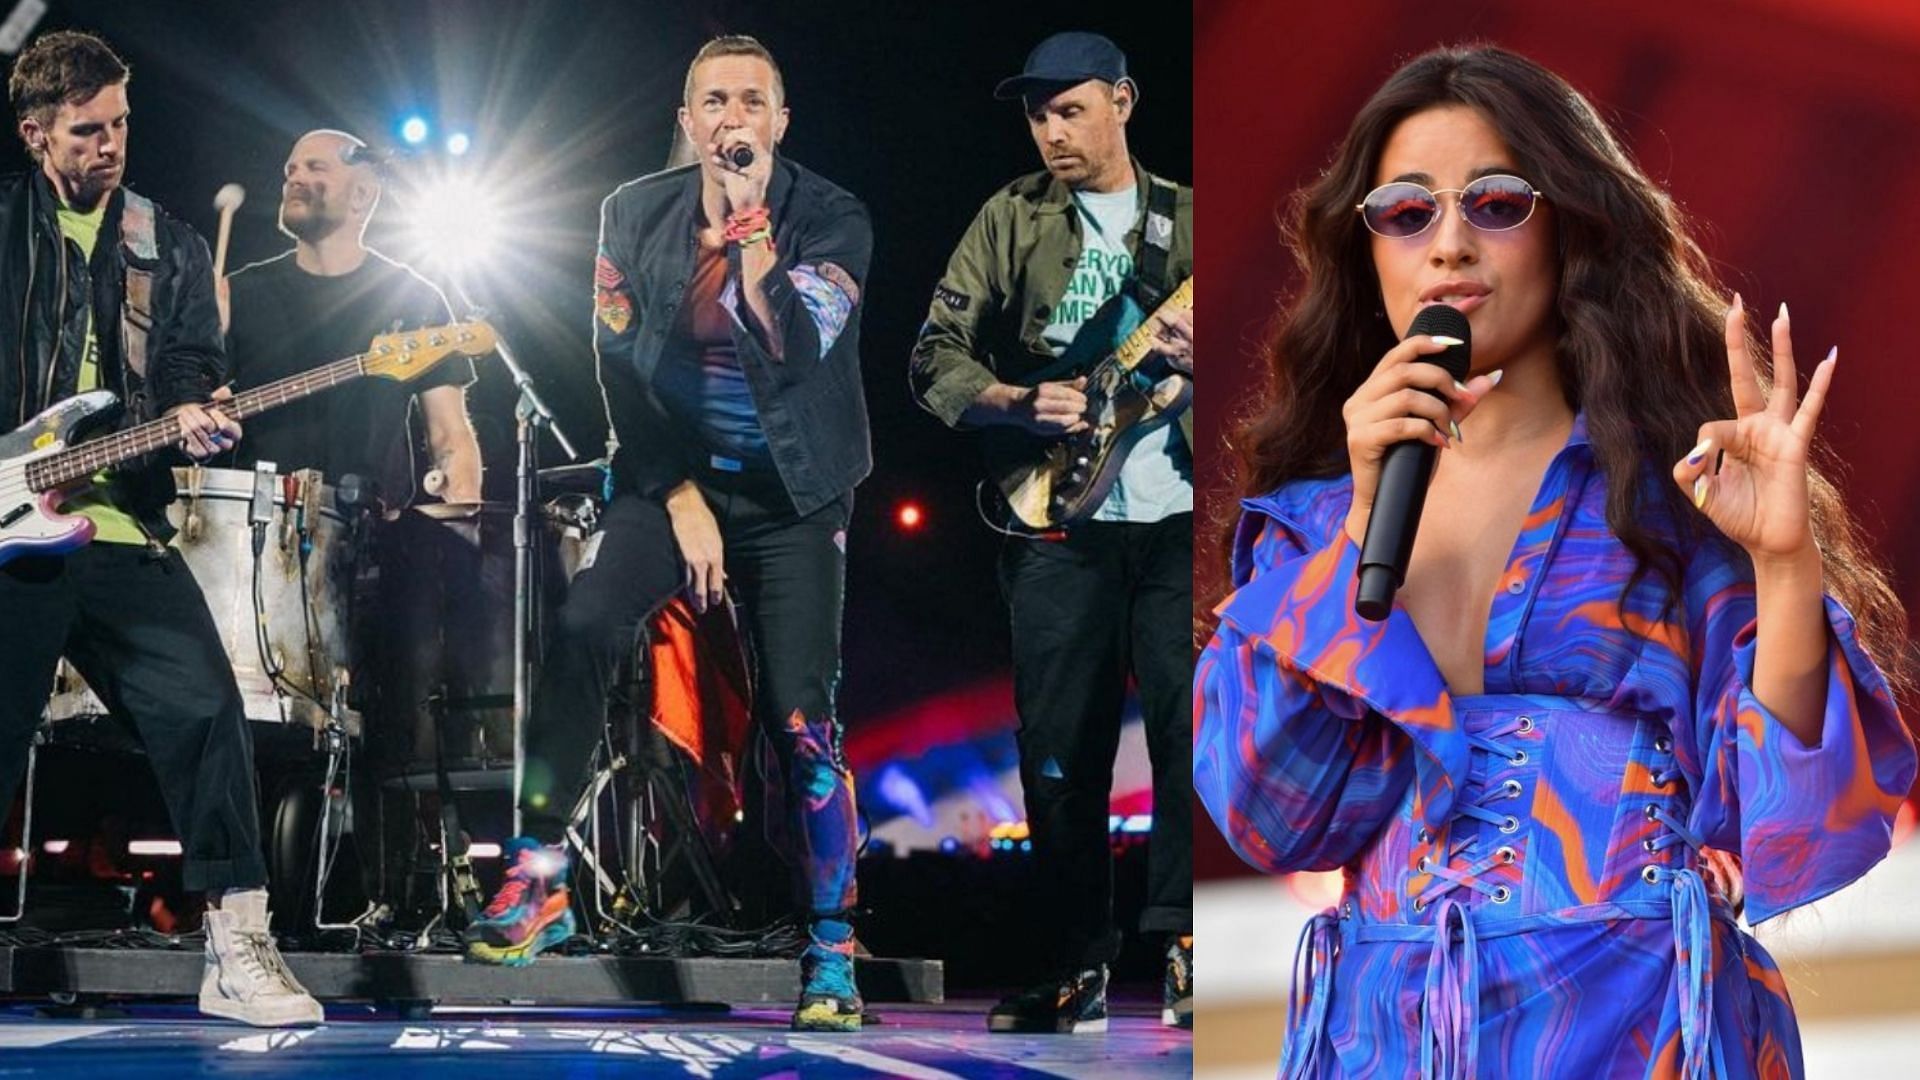 Coldplay has announced more dates for their Music of the Spheres World Tour with Camila Cabello supporting some dates. (Images via @Coldplay/Instagram and Theo Wargo/Getty)